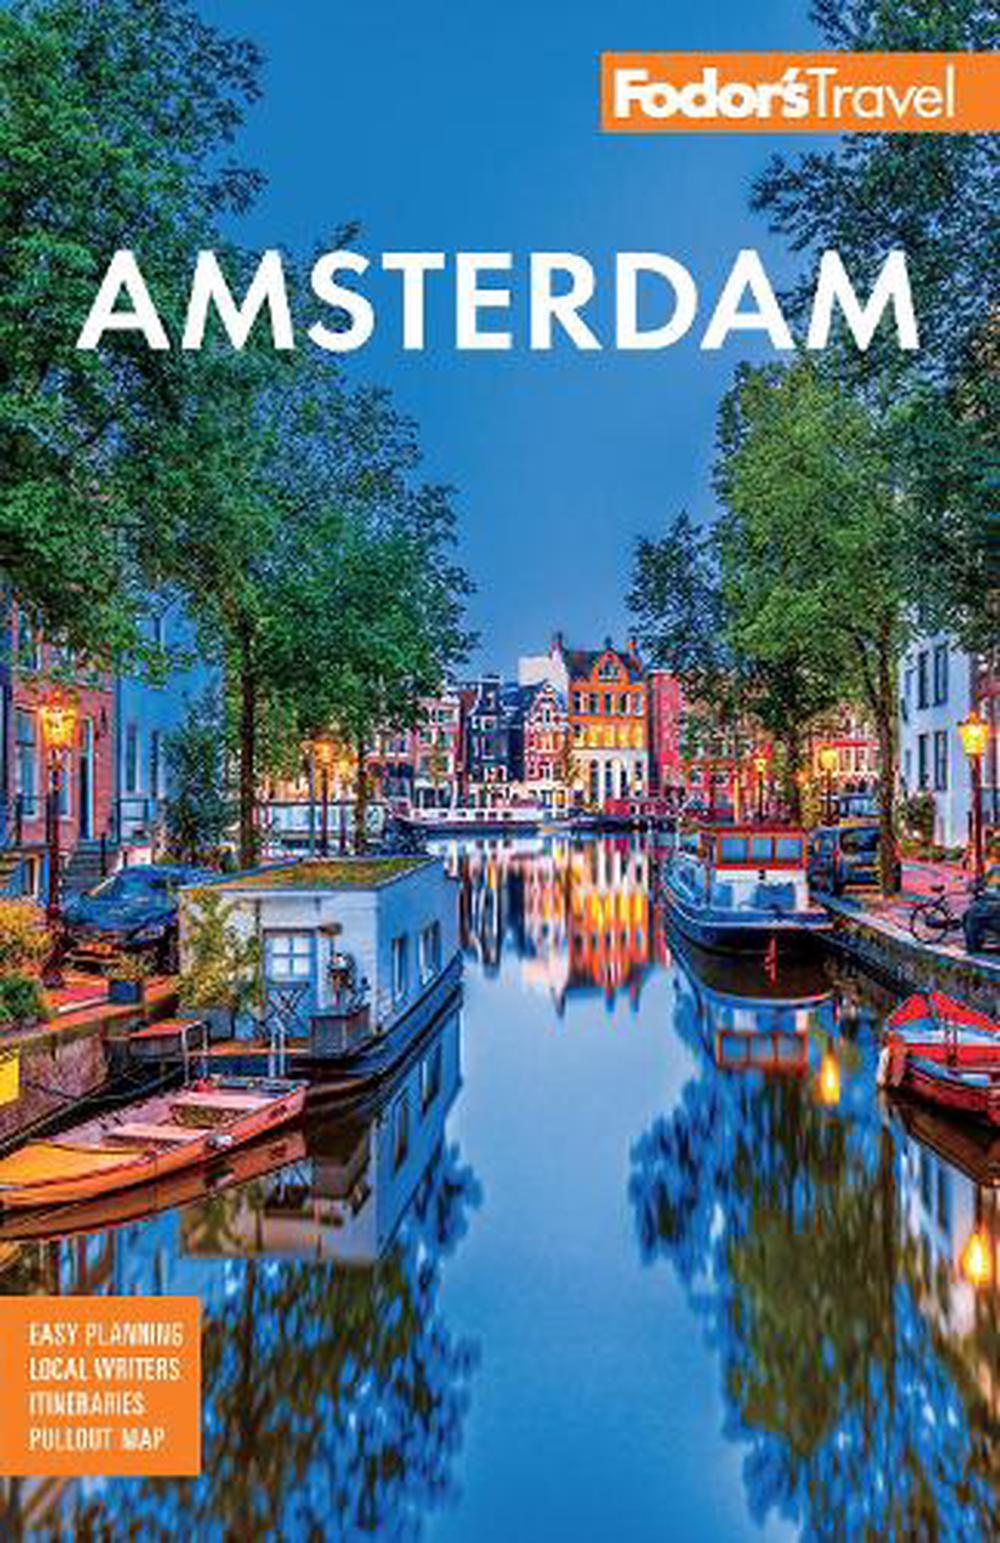 Paperback,　online　by　Buy　9781640973183　Fodor's　Nile　Travel　Fodor's　Amsterdam　The　Guides,　at